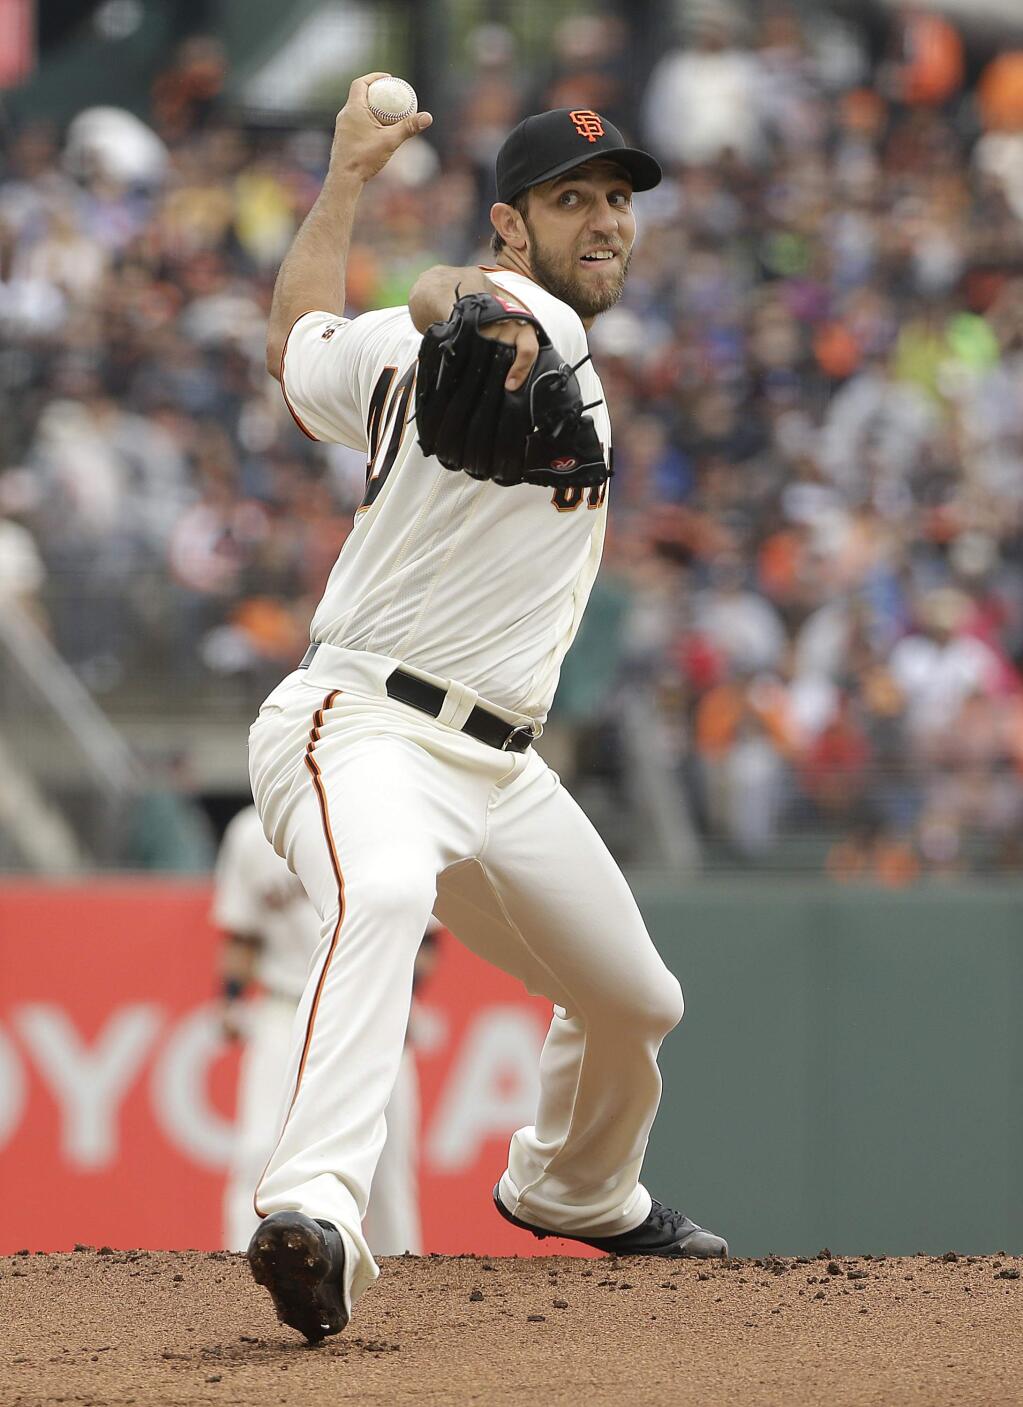 San Francisco Giants pitcher Madison Bumgarner throws against the Los Angeles Dodgers during the first inning of a baseball game in San Francisco, Saturday, April 9, 2016. (AP Photo/Jeff Chiu)